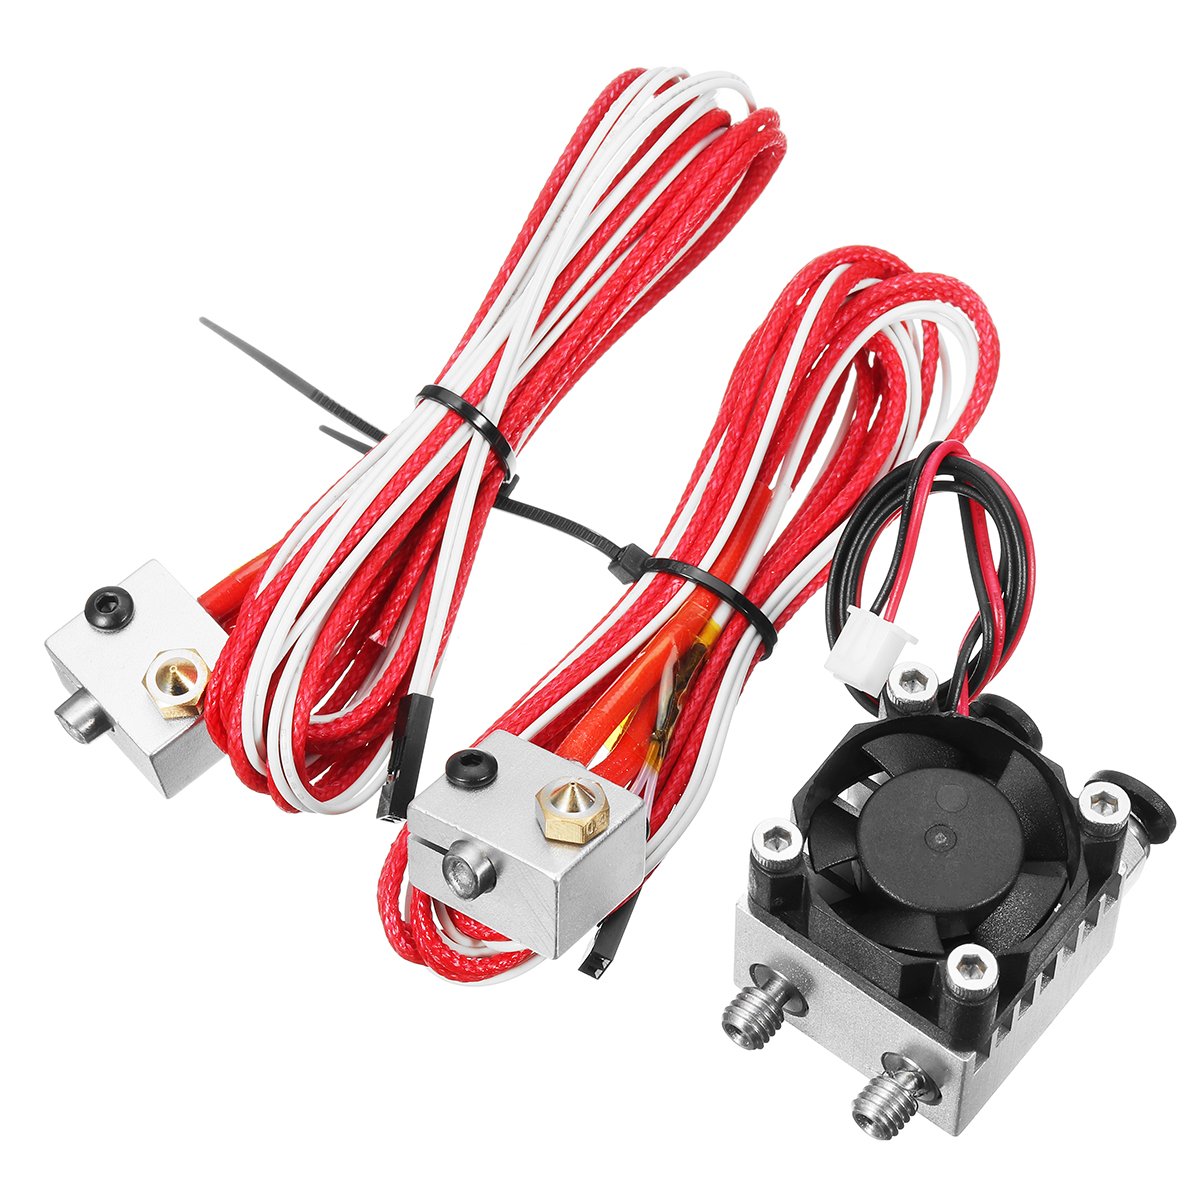 1.75mm/3.0mm Fialment 0.4mm Nozzle Upgraded Dual Head Extruder Kit for 3D Printer 2